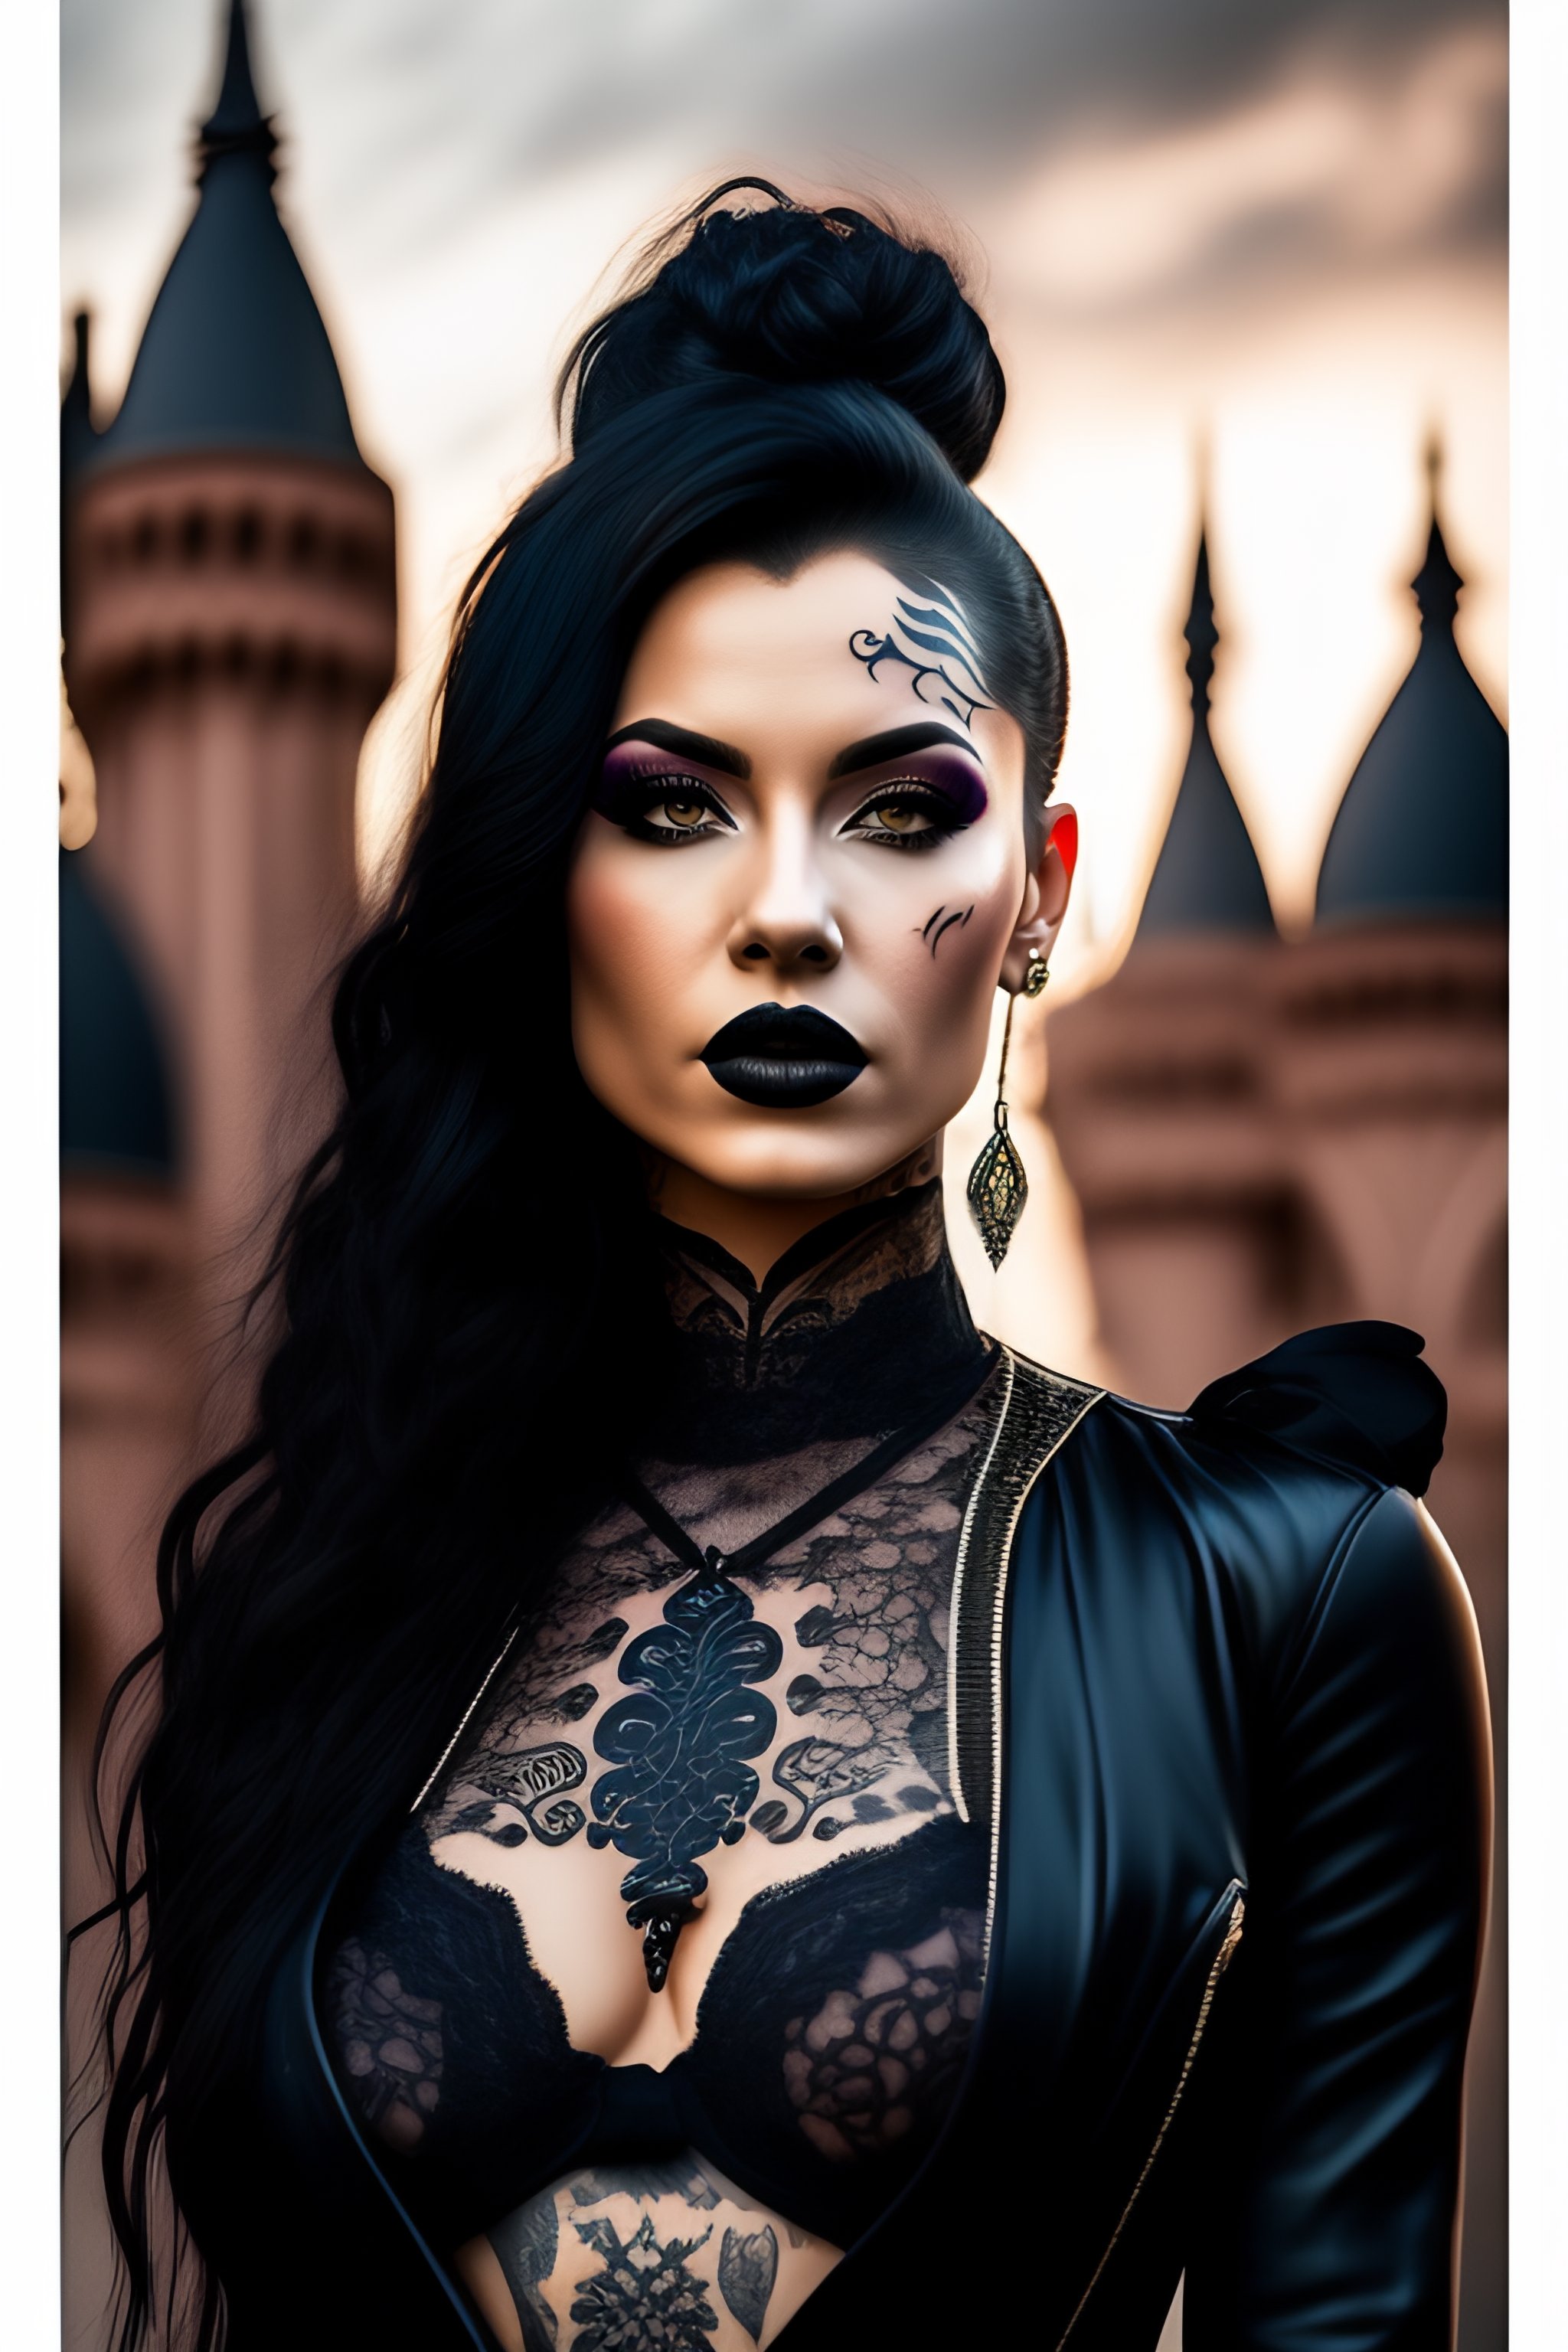 Lexica Portrait Of An Attractive Female Goth Style With Tattoos And Lace In A Gothic City